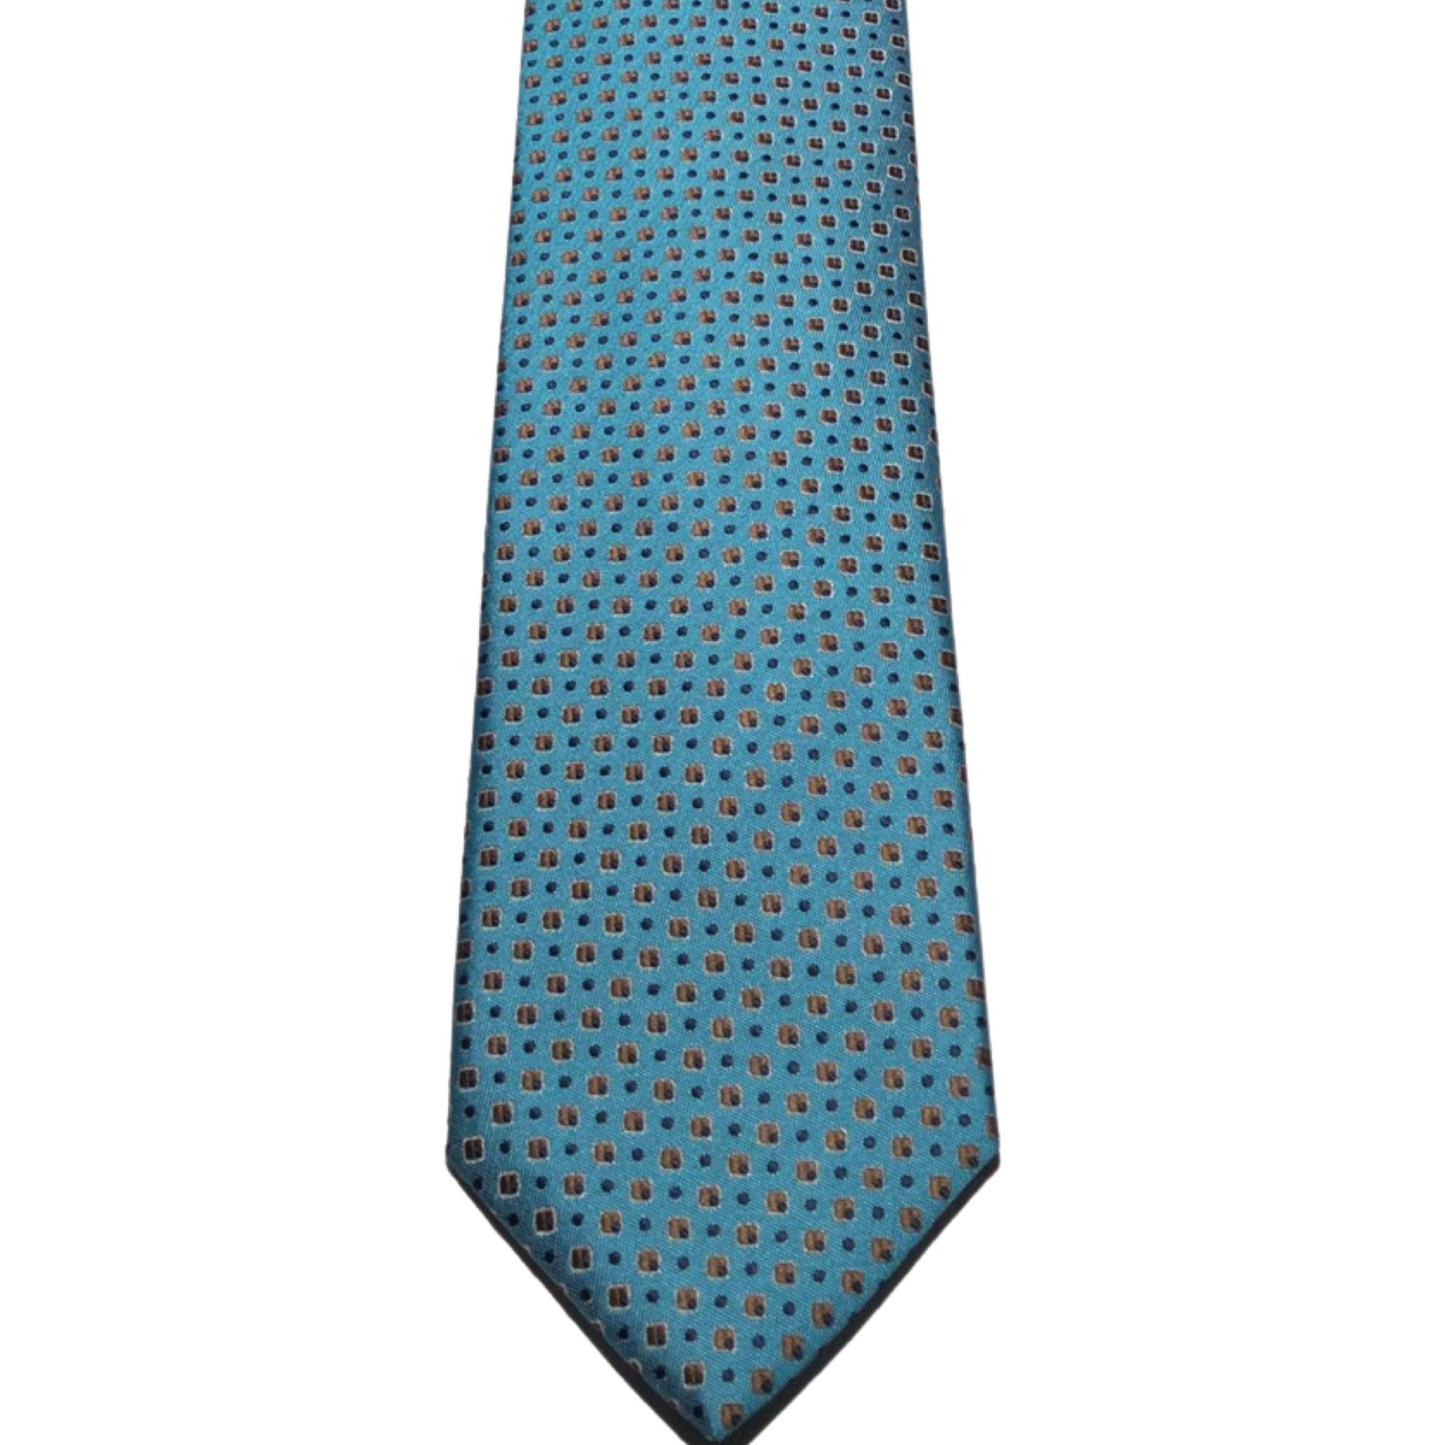 This Gian Marco Venturi microfibre teal tie has a beige polka dot pattern, making it a nice pairing with a crisp white or light blue Scoop dress shirt, a navy blue suit and brown shoes.